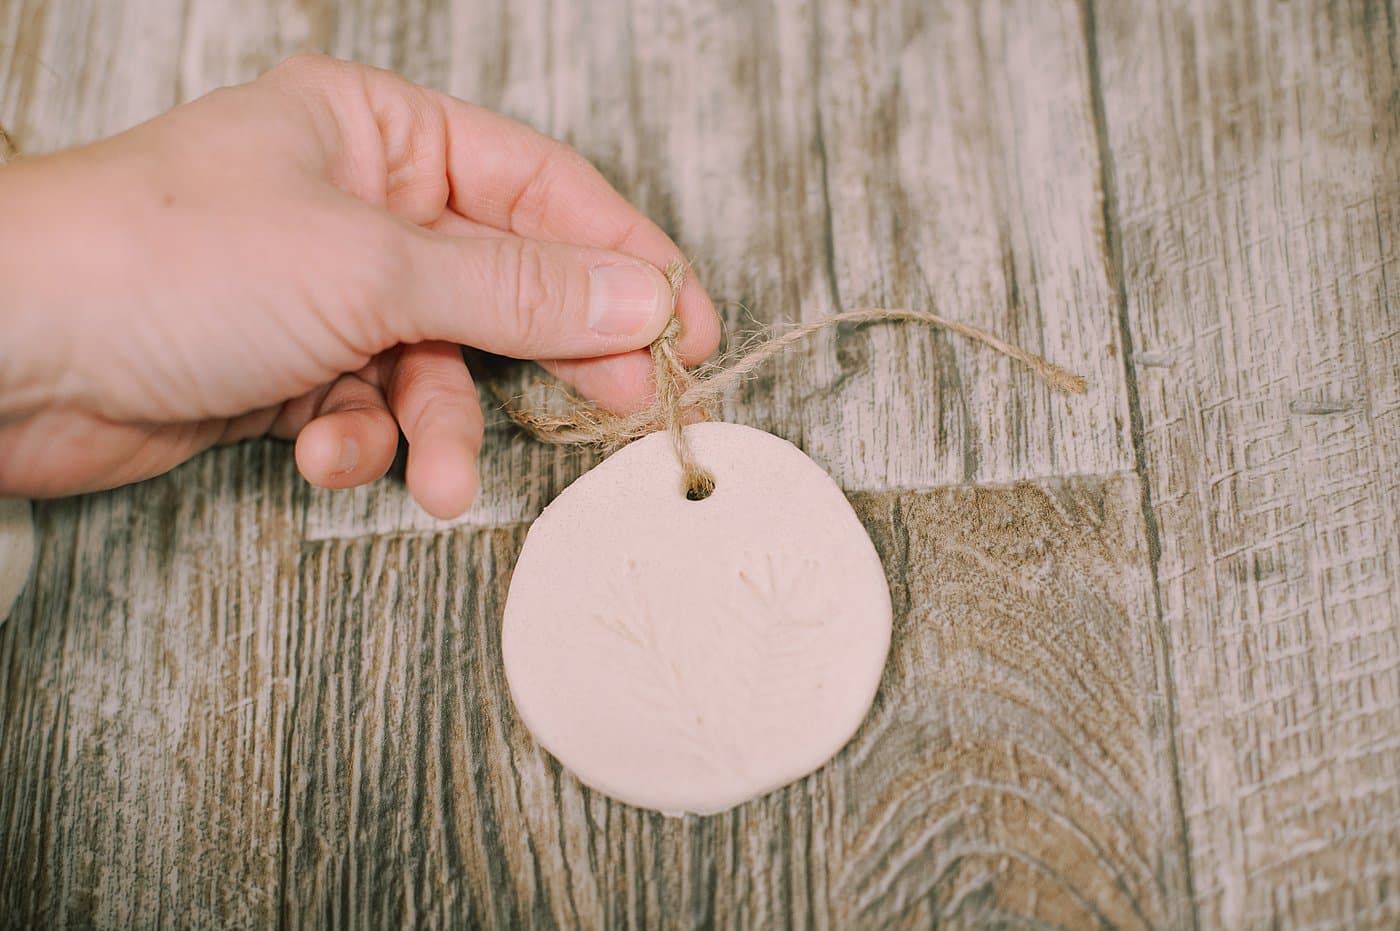 Tie small twine strings to the salt dough ornaments so you can add them to a longer twine string to hang as a garland.